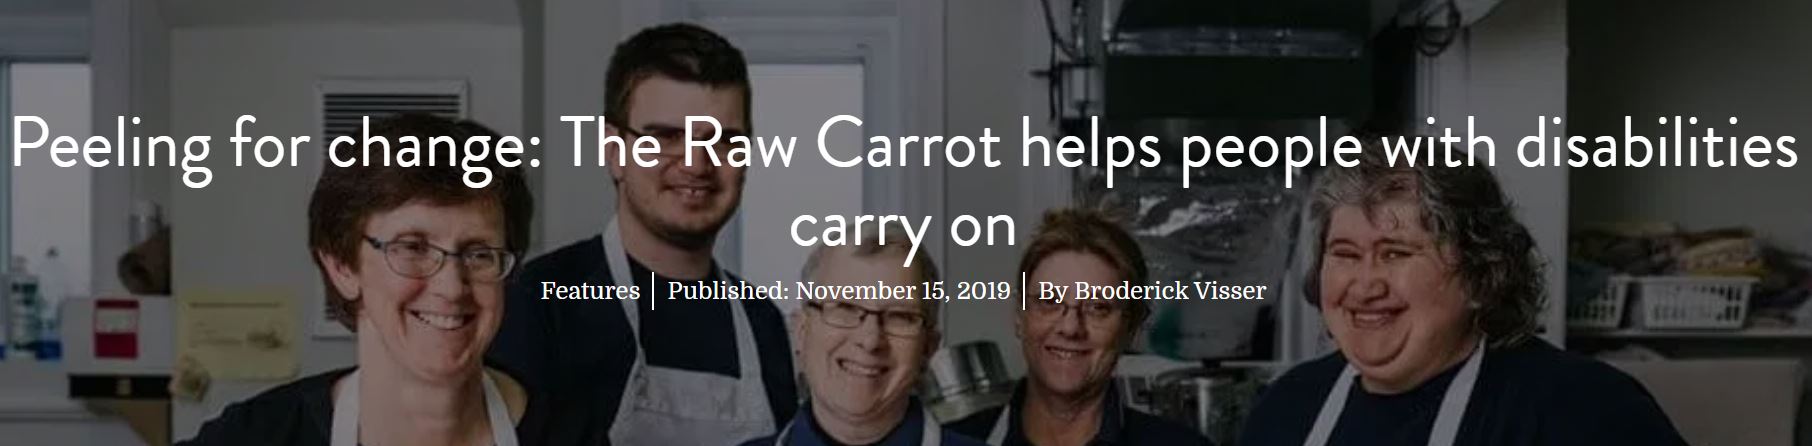 “The Raw Carrot helps people with disAbilities carry on”